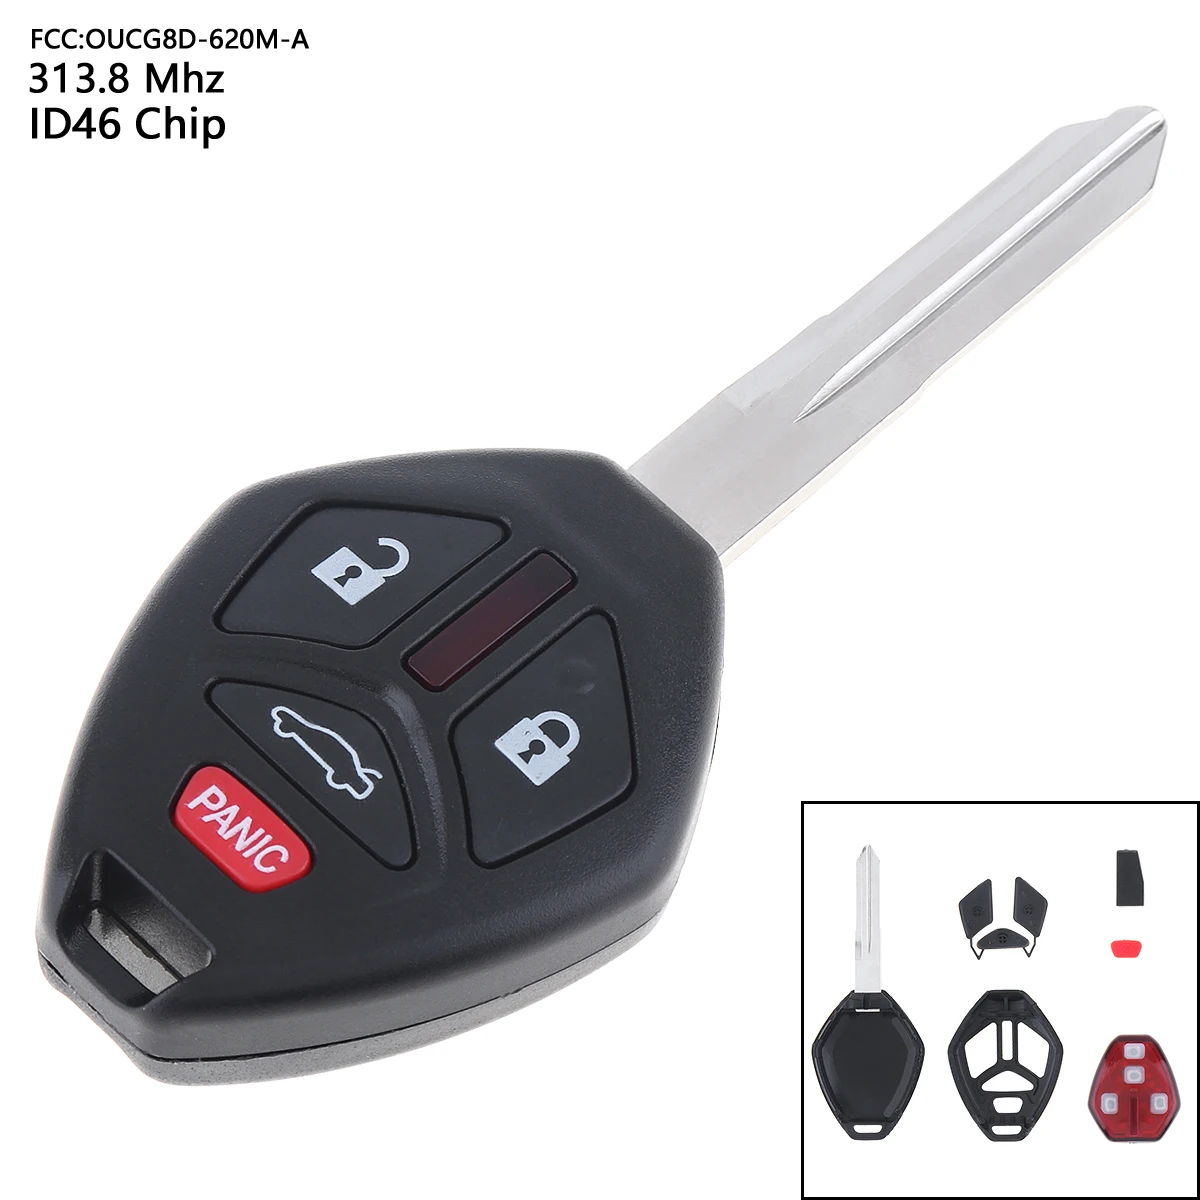 313.8MHz 4 Buttons Car Remote Key Fob no Battery with ID46 Chip OUCG8D-620M-A Uncut Blade Fit for Mitsubishi 2006 2007 Eclipse